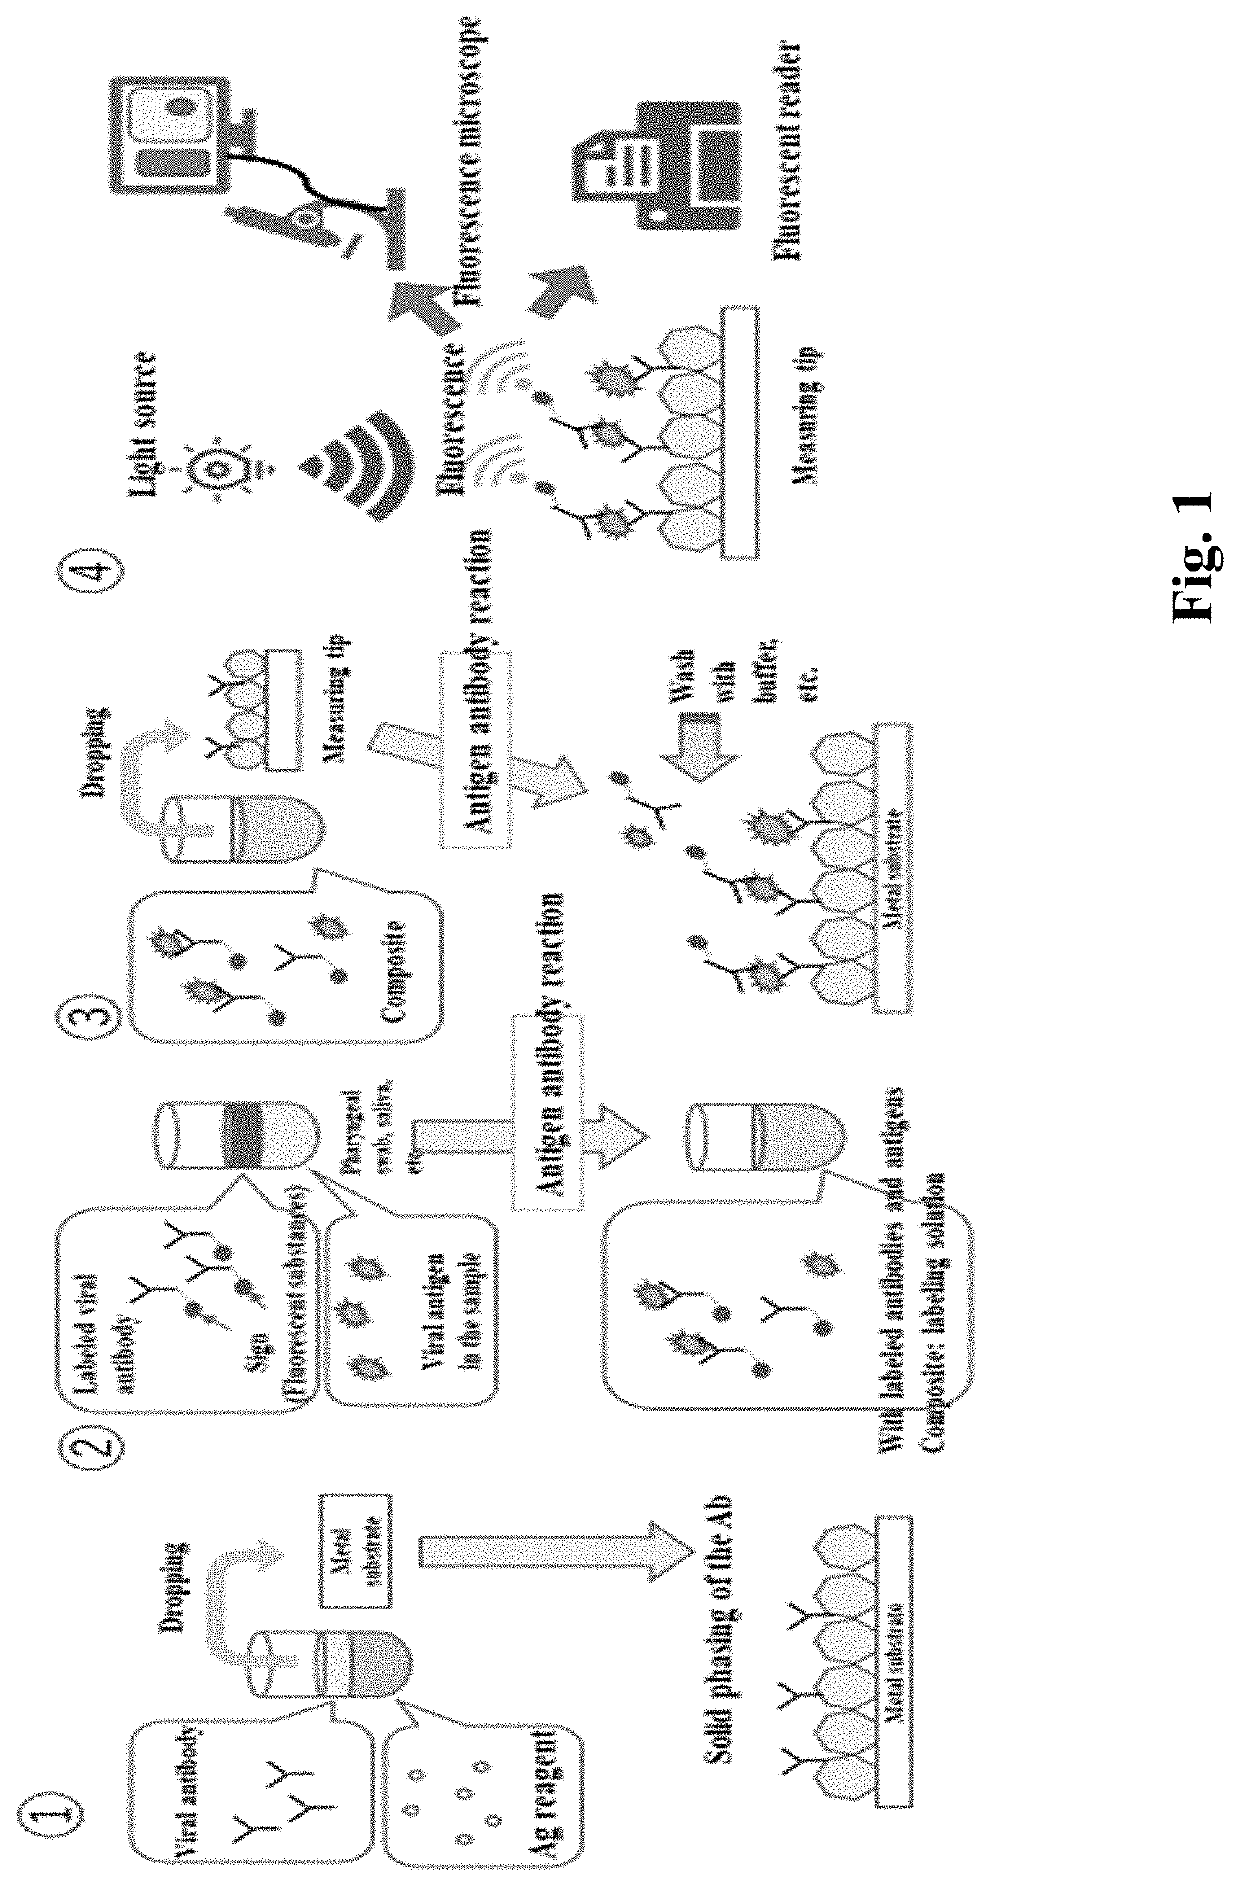 Fluorescence counting system for quantifying viruses or antibodies on an immobilized metal substrate by using an antigen-antibody reaction